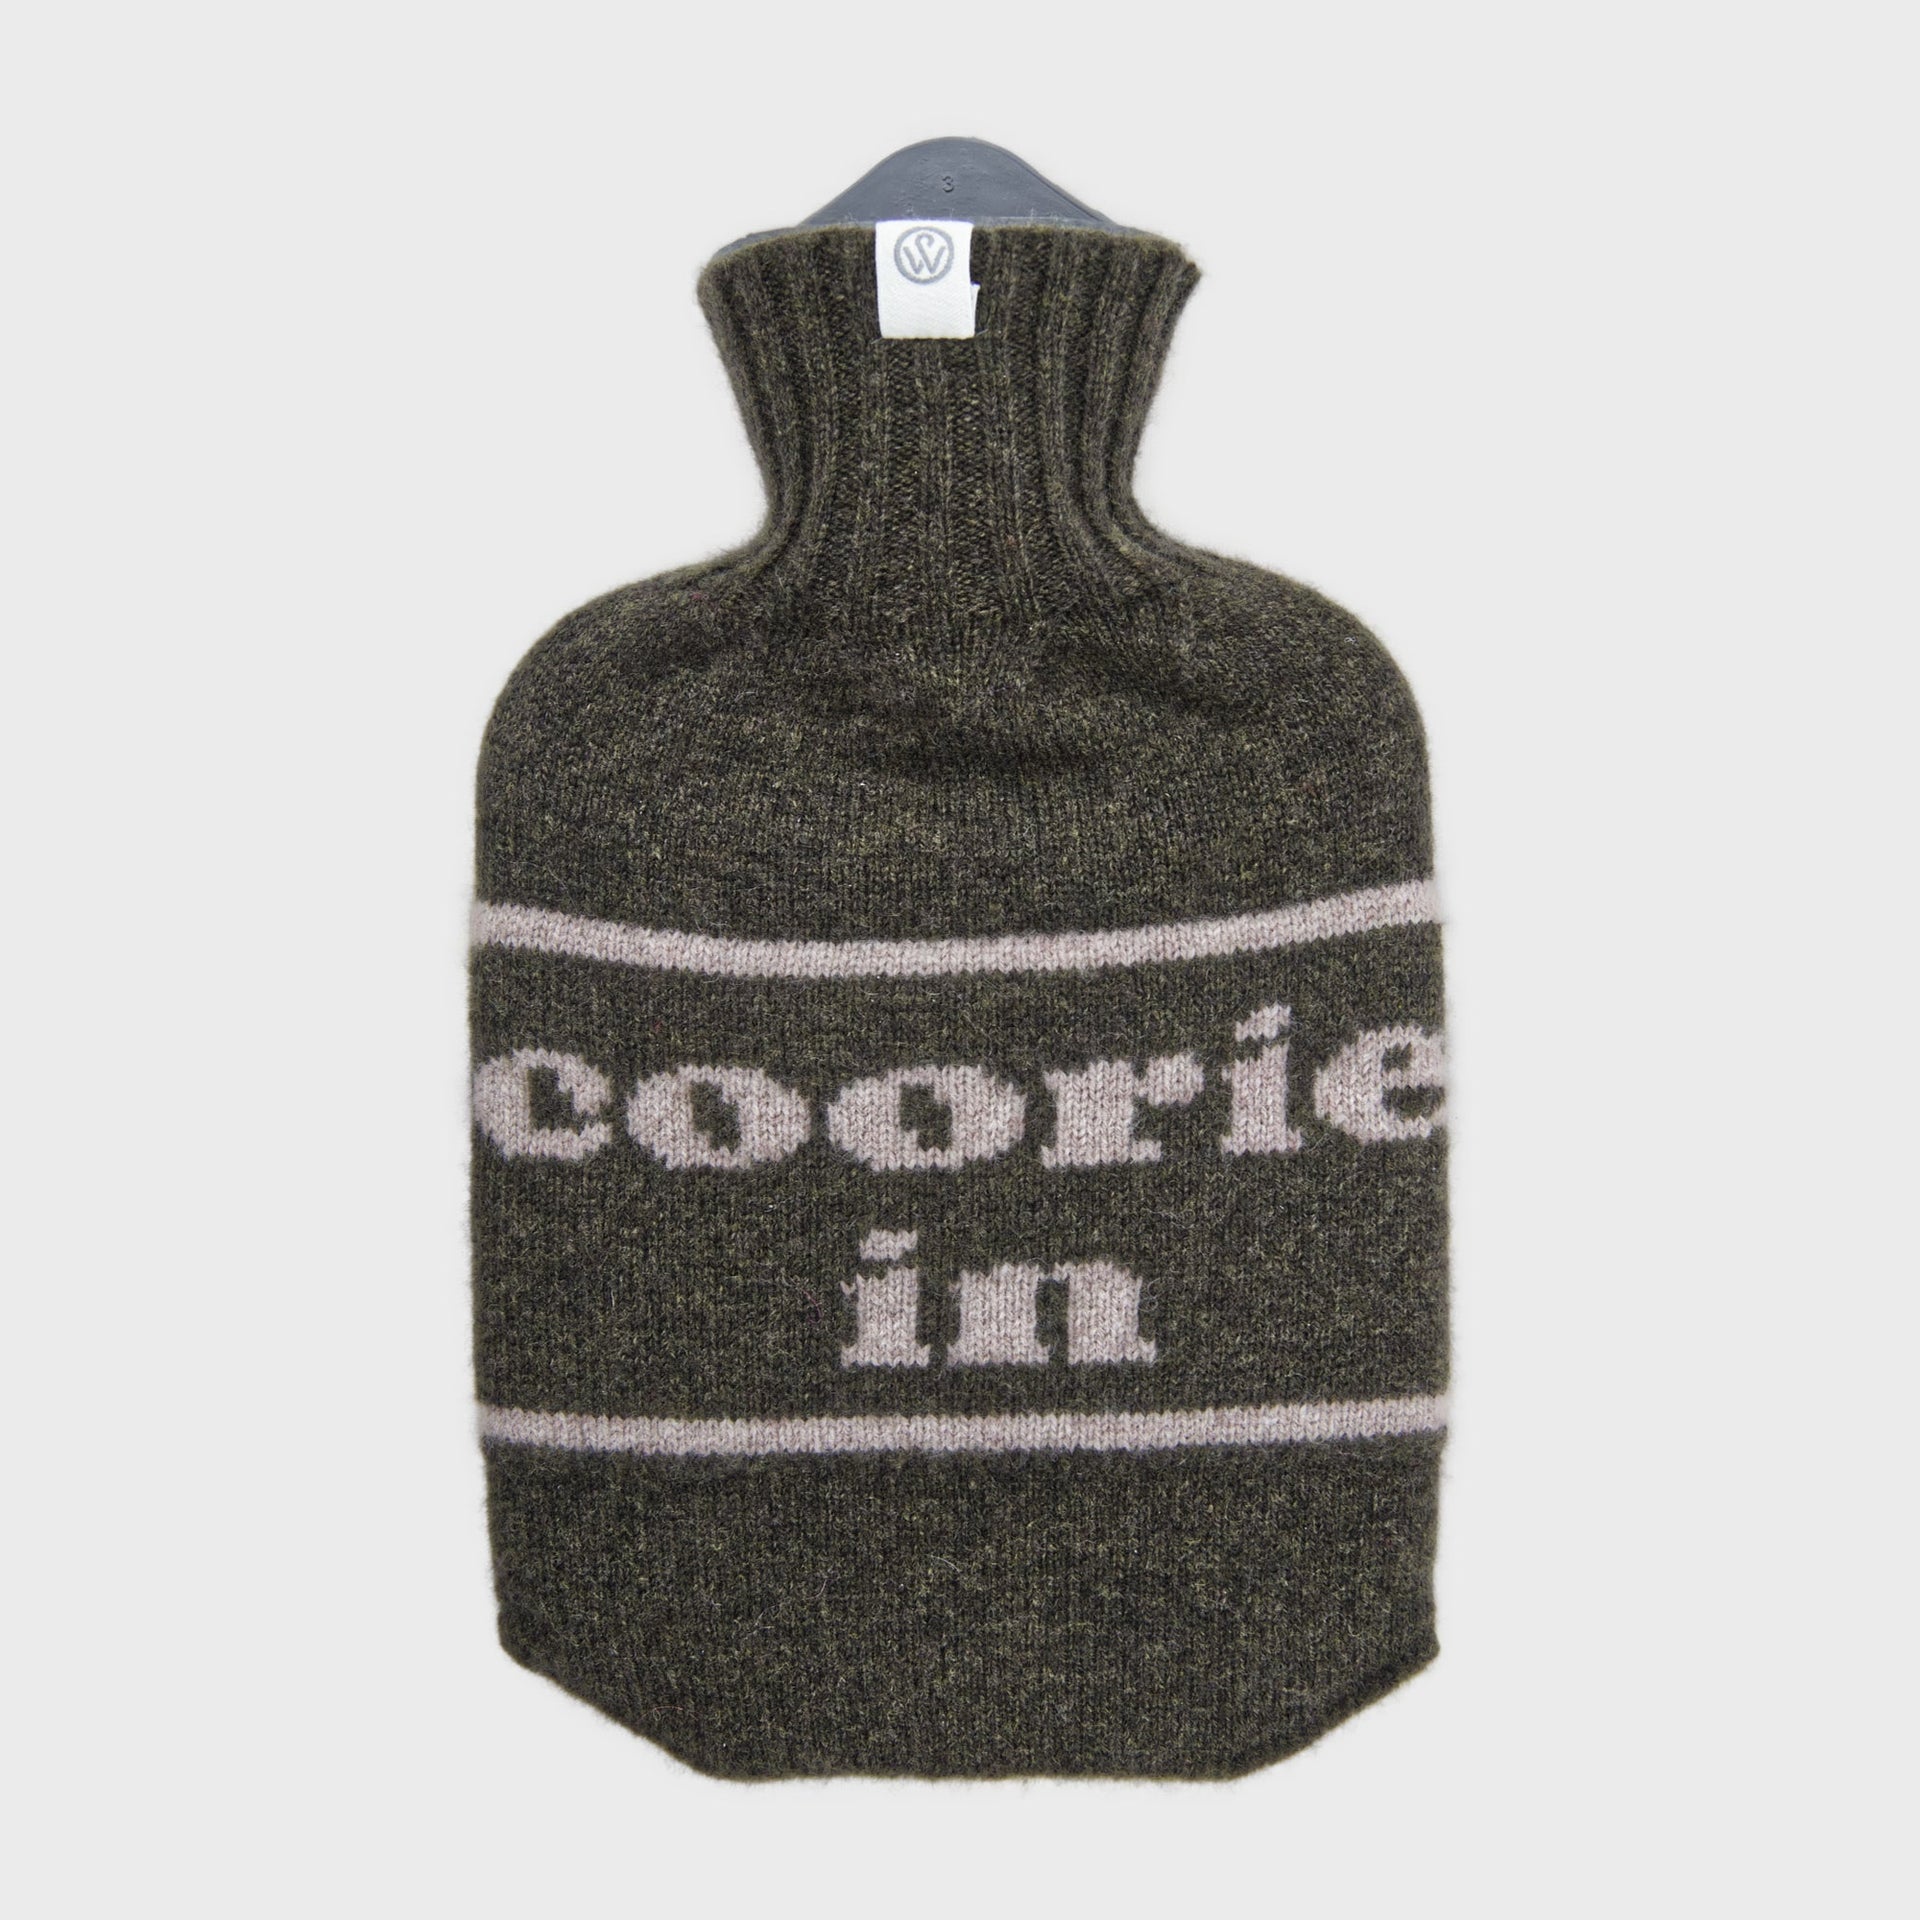 Lambswool Knit Coorie In Mini Sustainable Hot Water Bottle Charcoal/Grey - Made Scotland